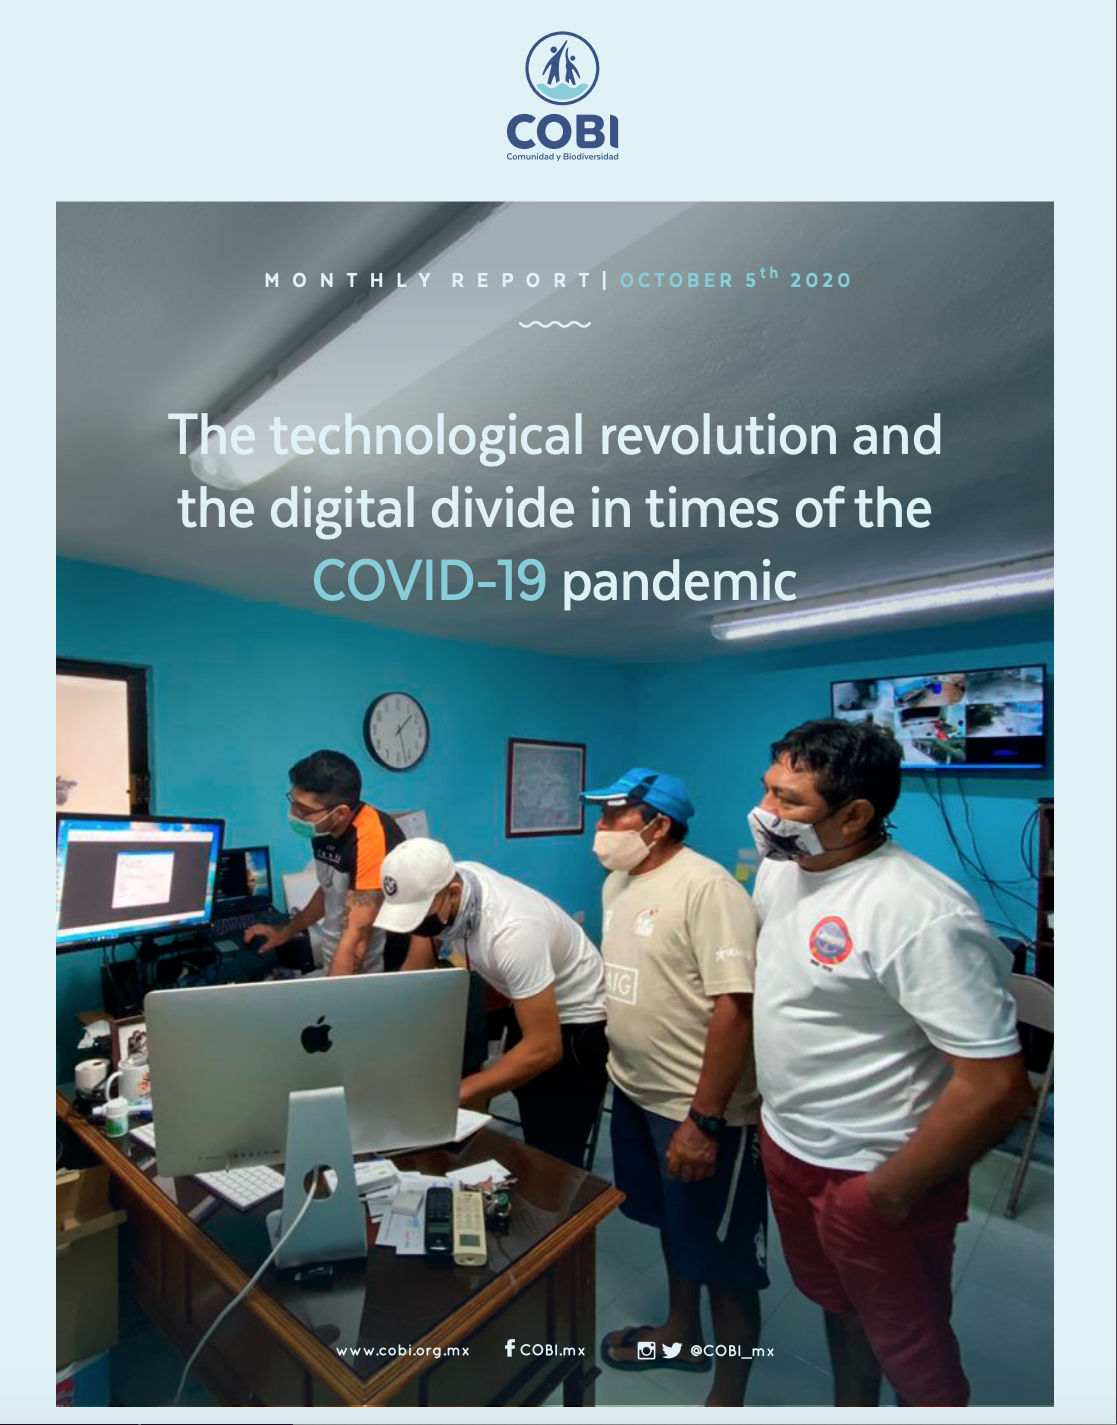 The Technological Revolution and the Digital Divide in Times of the COVID-19 Pandemic